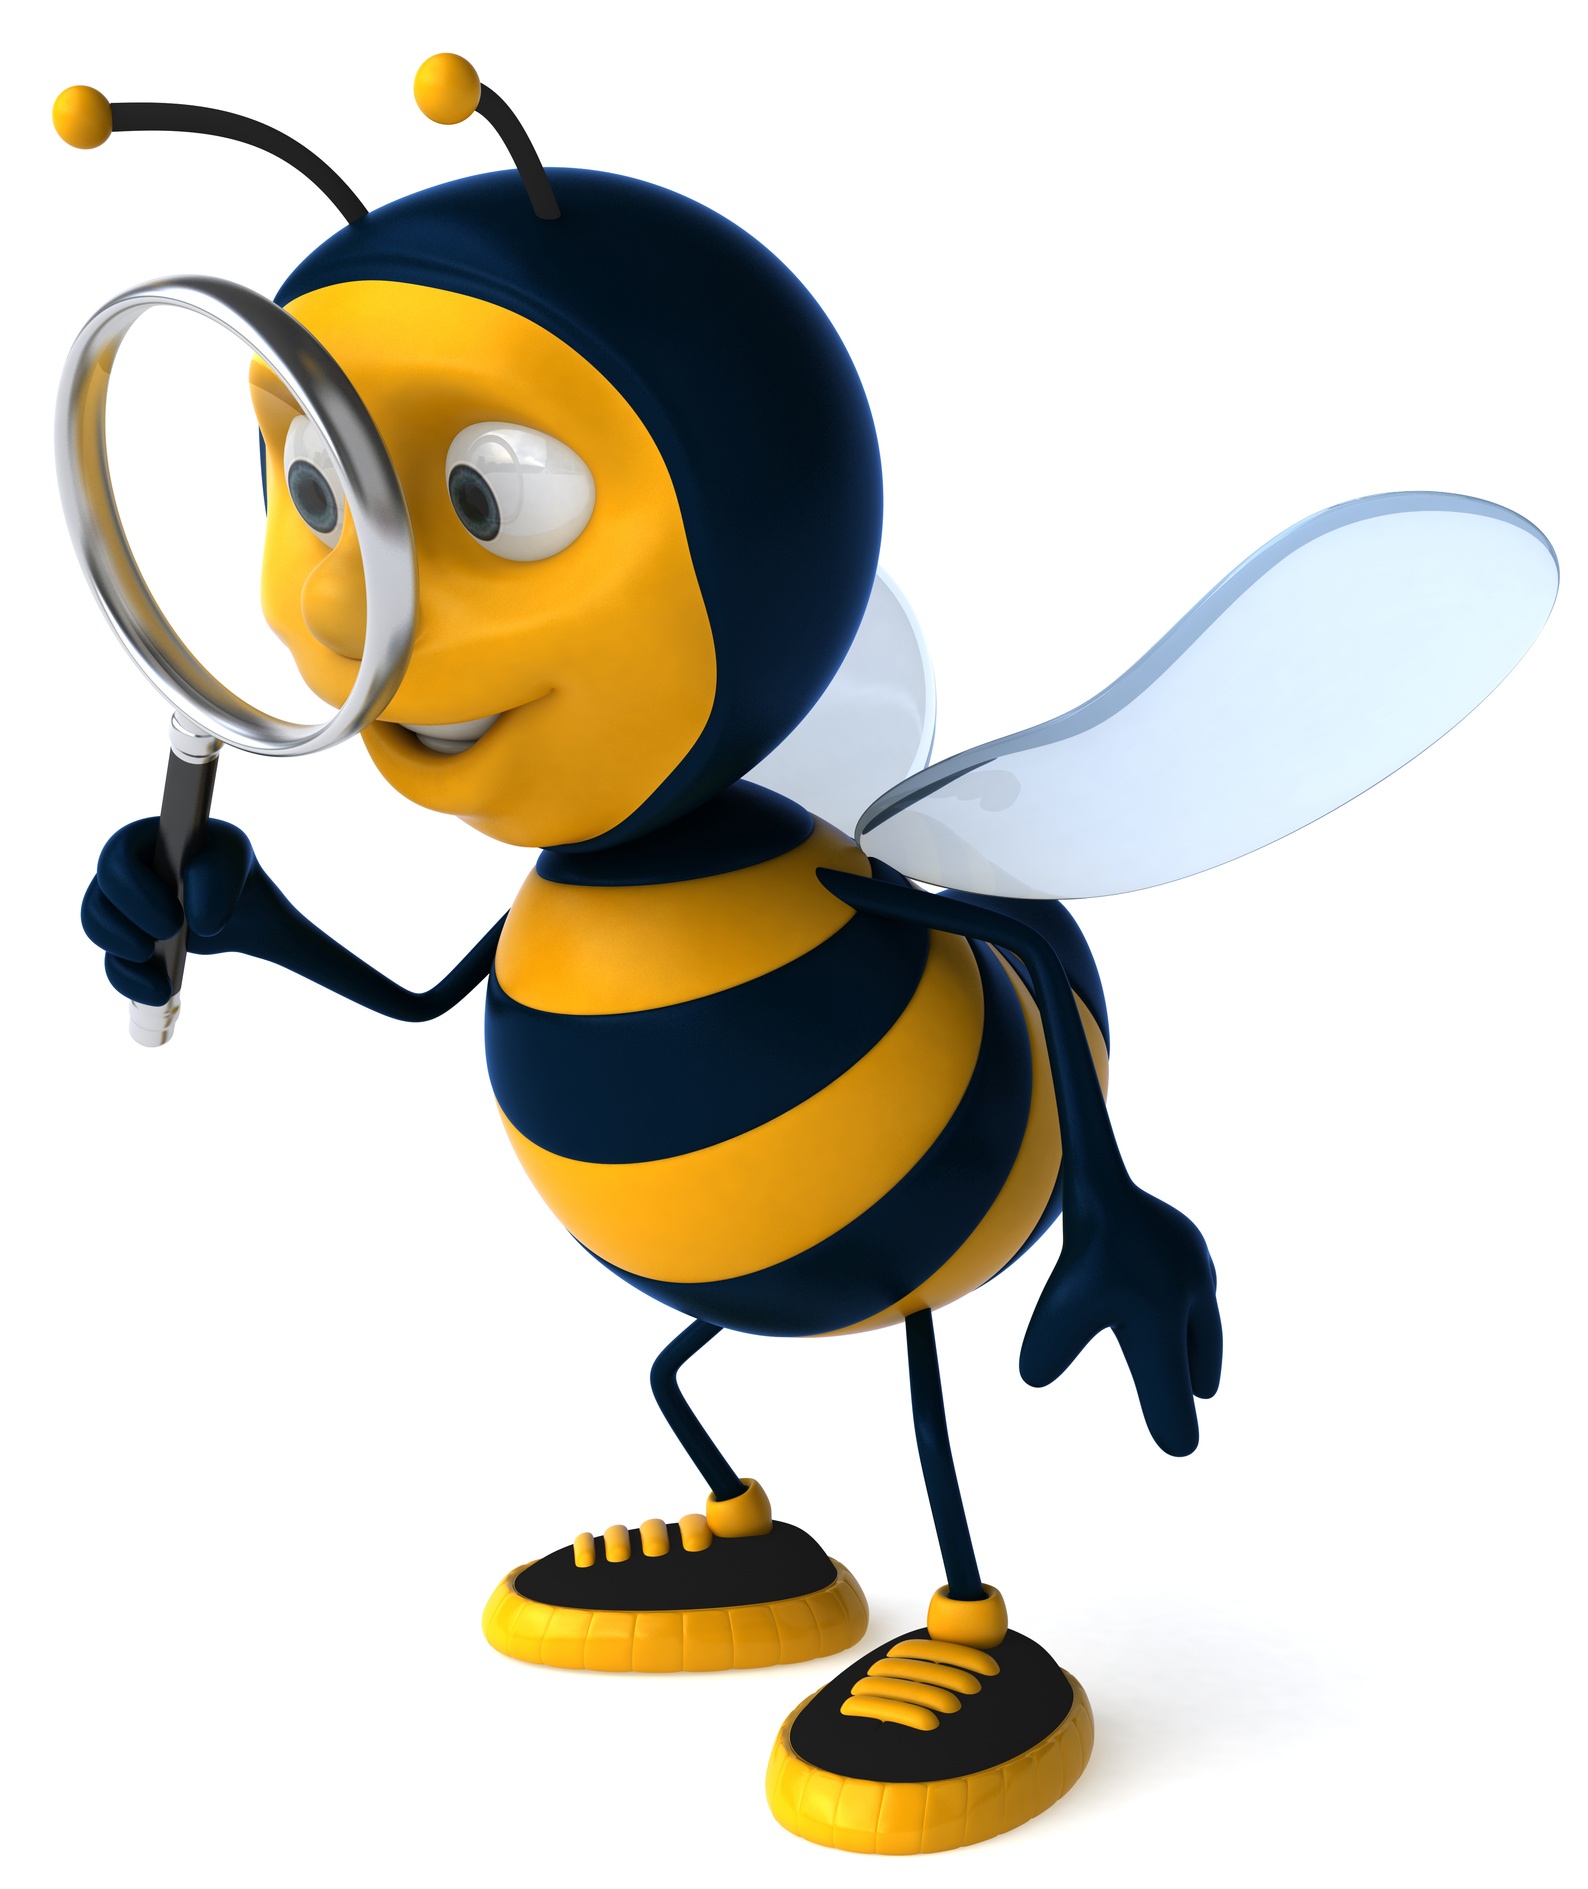 Bumble Bee Cartoon Picture | Free Download Clip Art | Free Clip ...